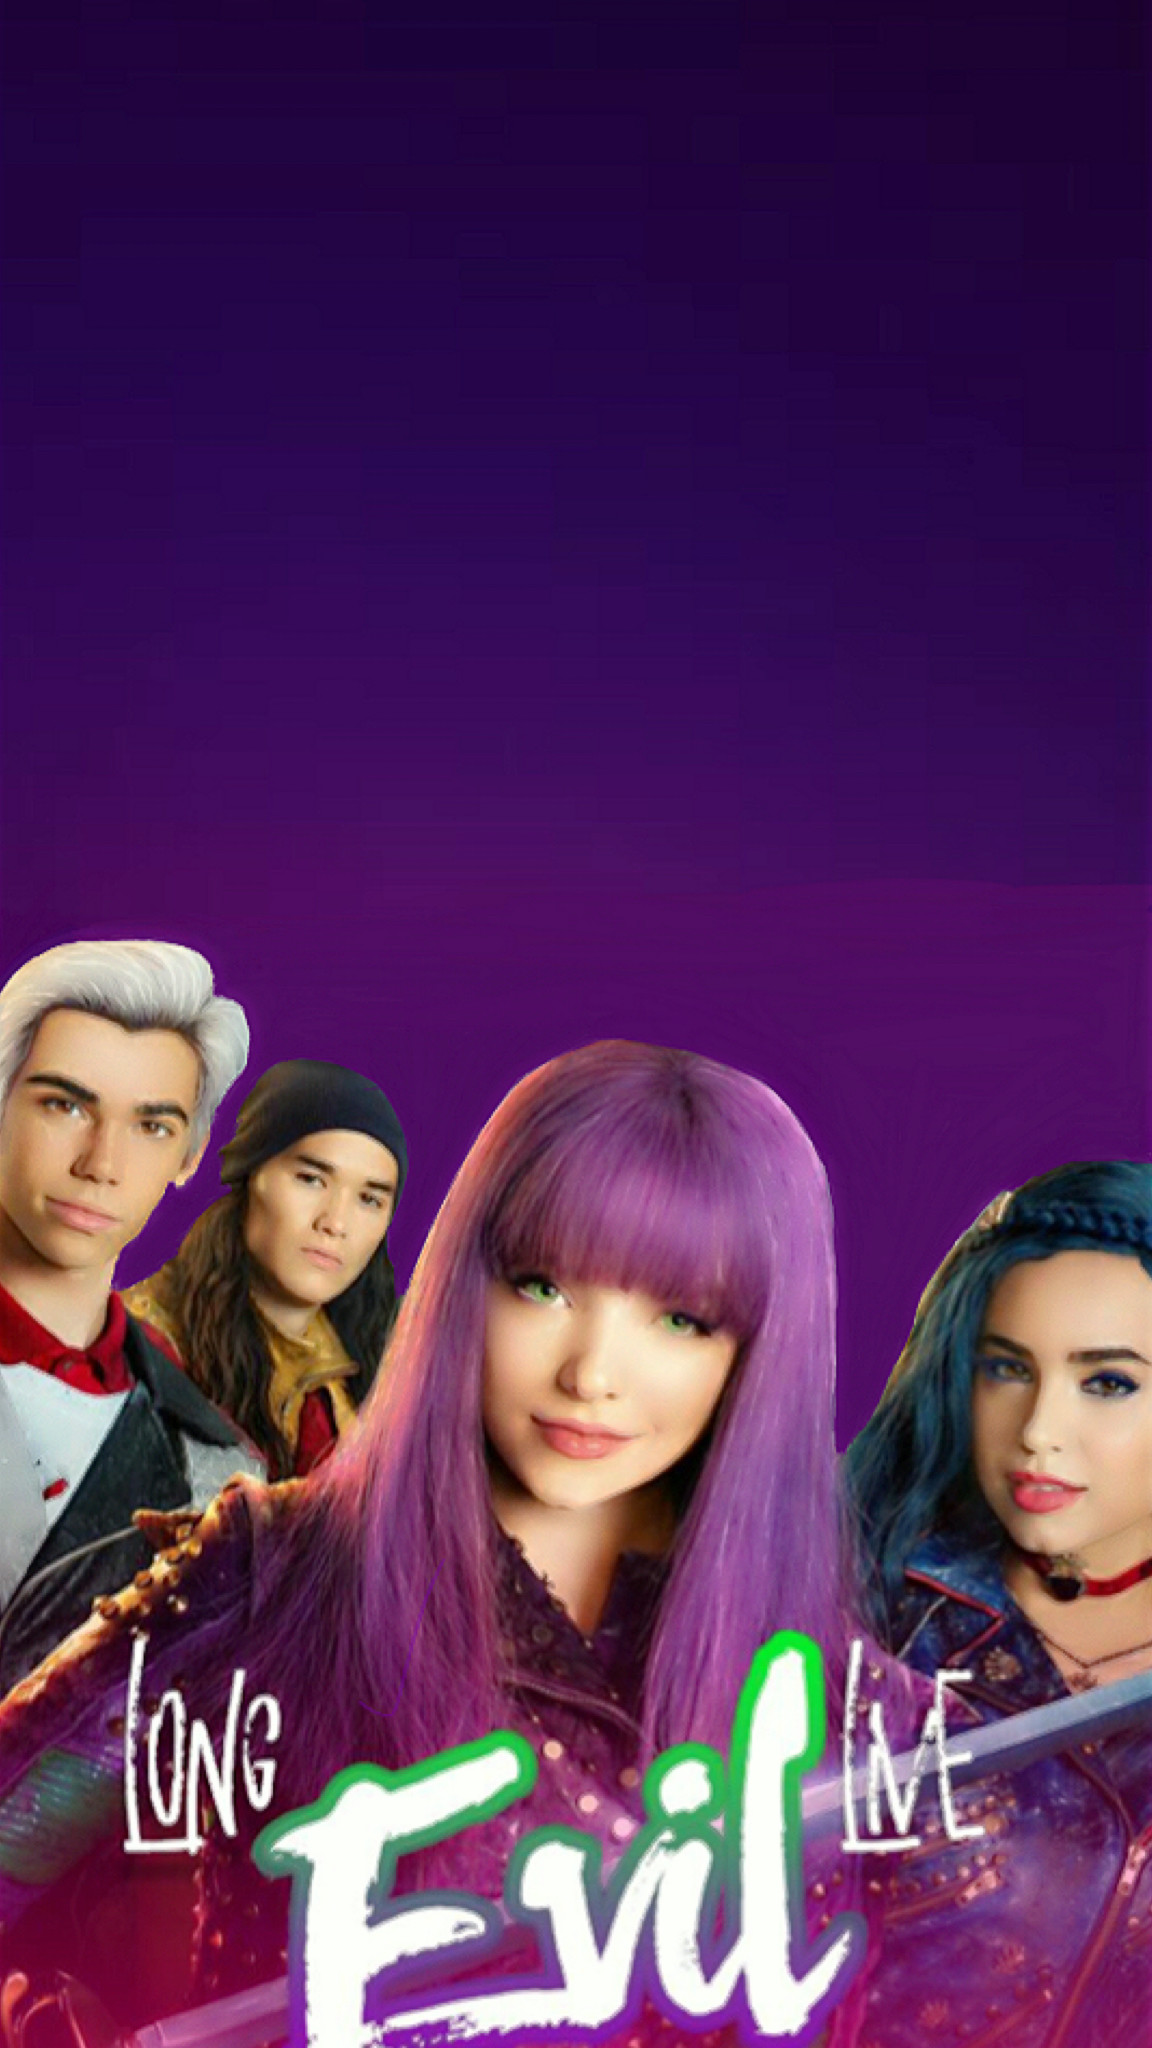 1152x2048 Long Live Havin' Some Fun rather Descendants 2 wallpaper edited by